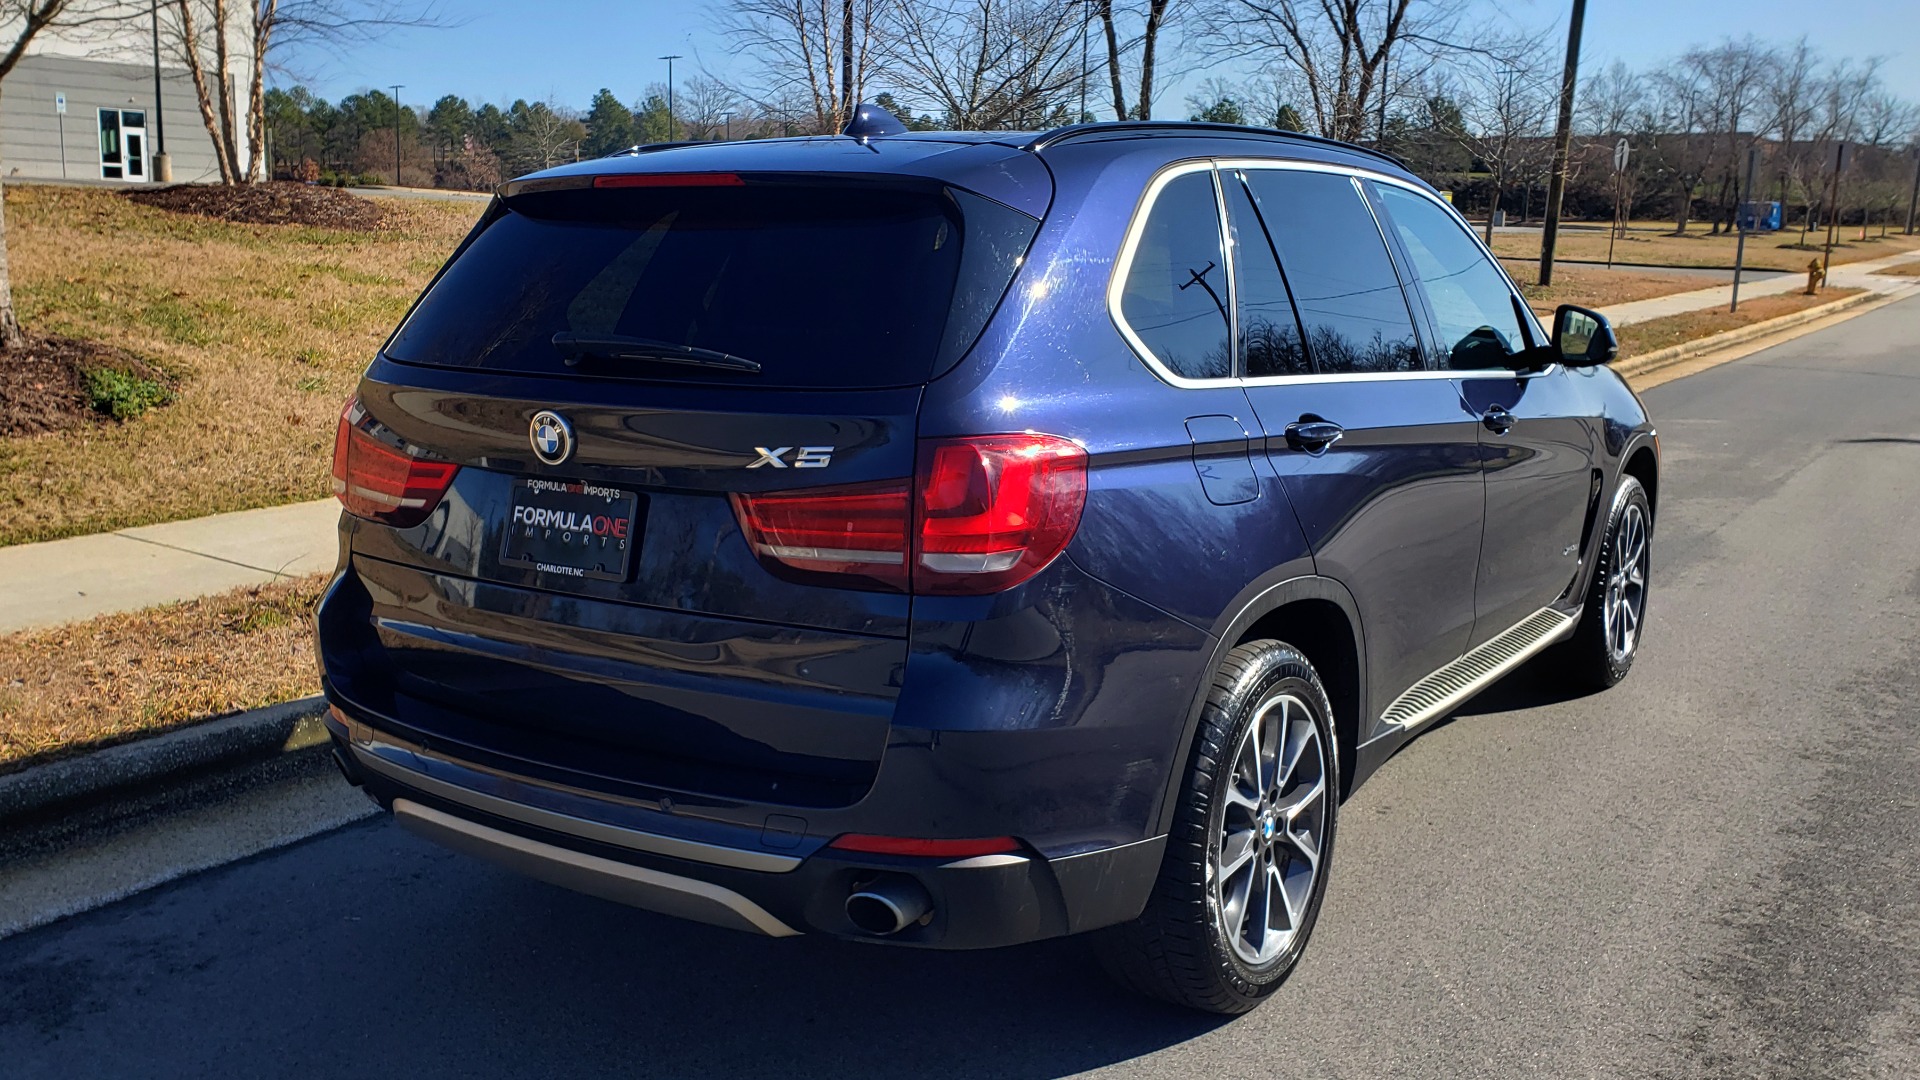 Used 2015 BMW X5 XDRIVE35I PREMIUM / NAV / XLINE / CLD WTHR / DRVR ASST / REARVIEW for sale Sold at Formula Imports in Charlotte NC 28227 9